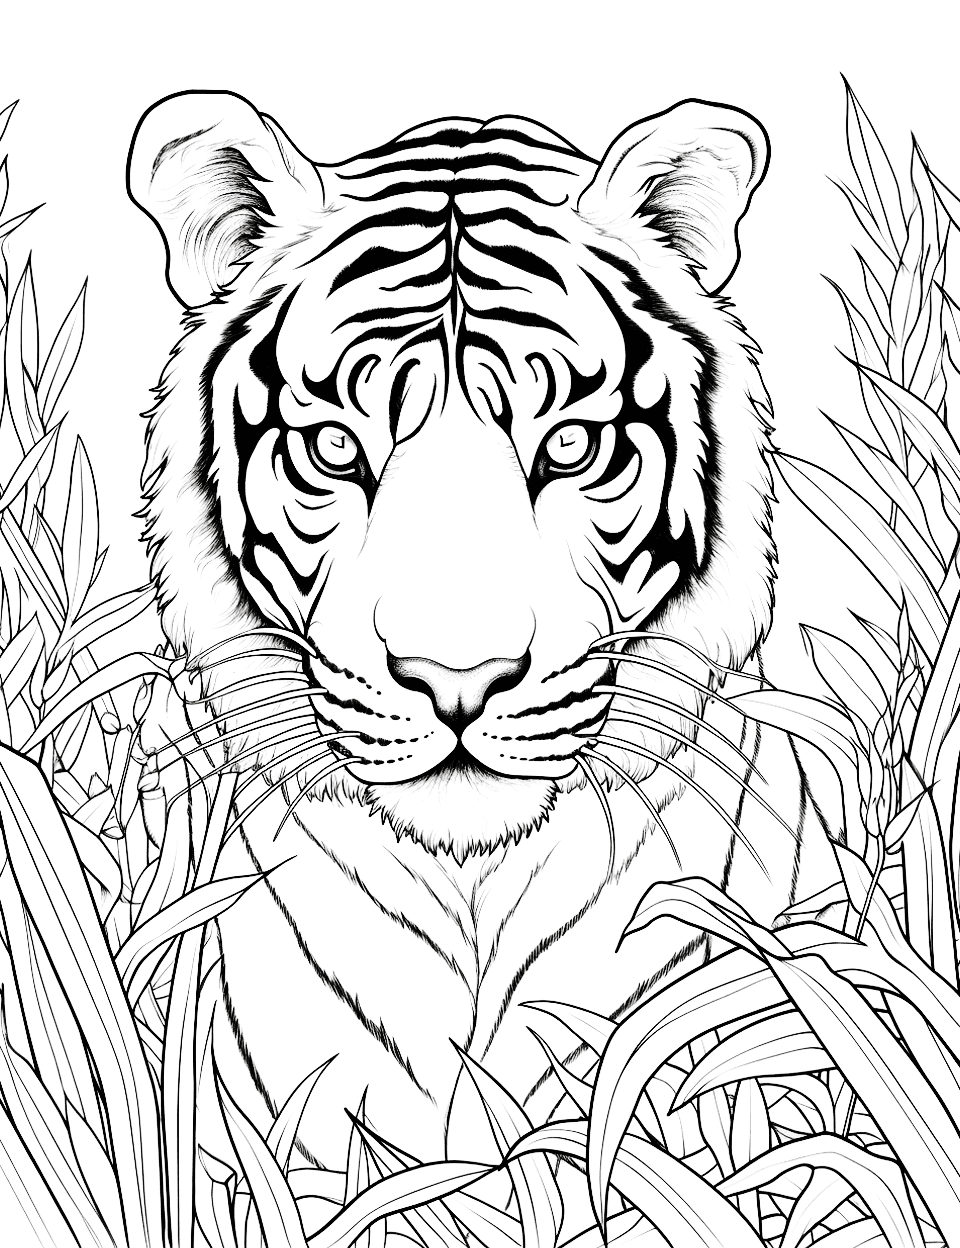 Tiger's Stealthy Stalk Adult Coloring Page - A tiger moving stealthily in tall grass.